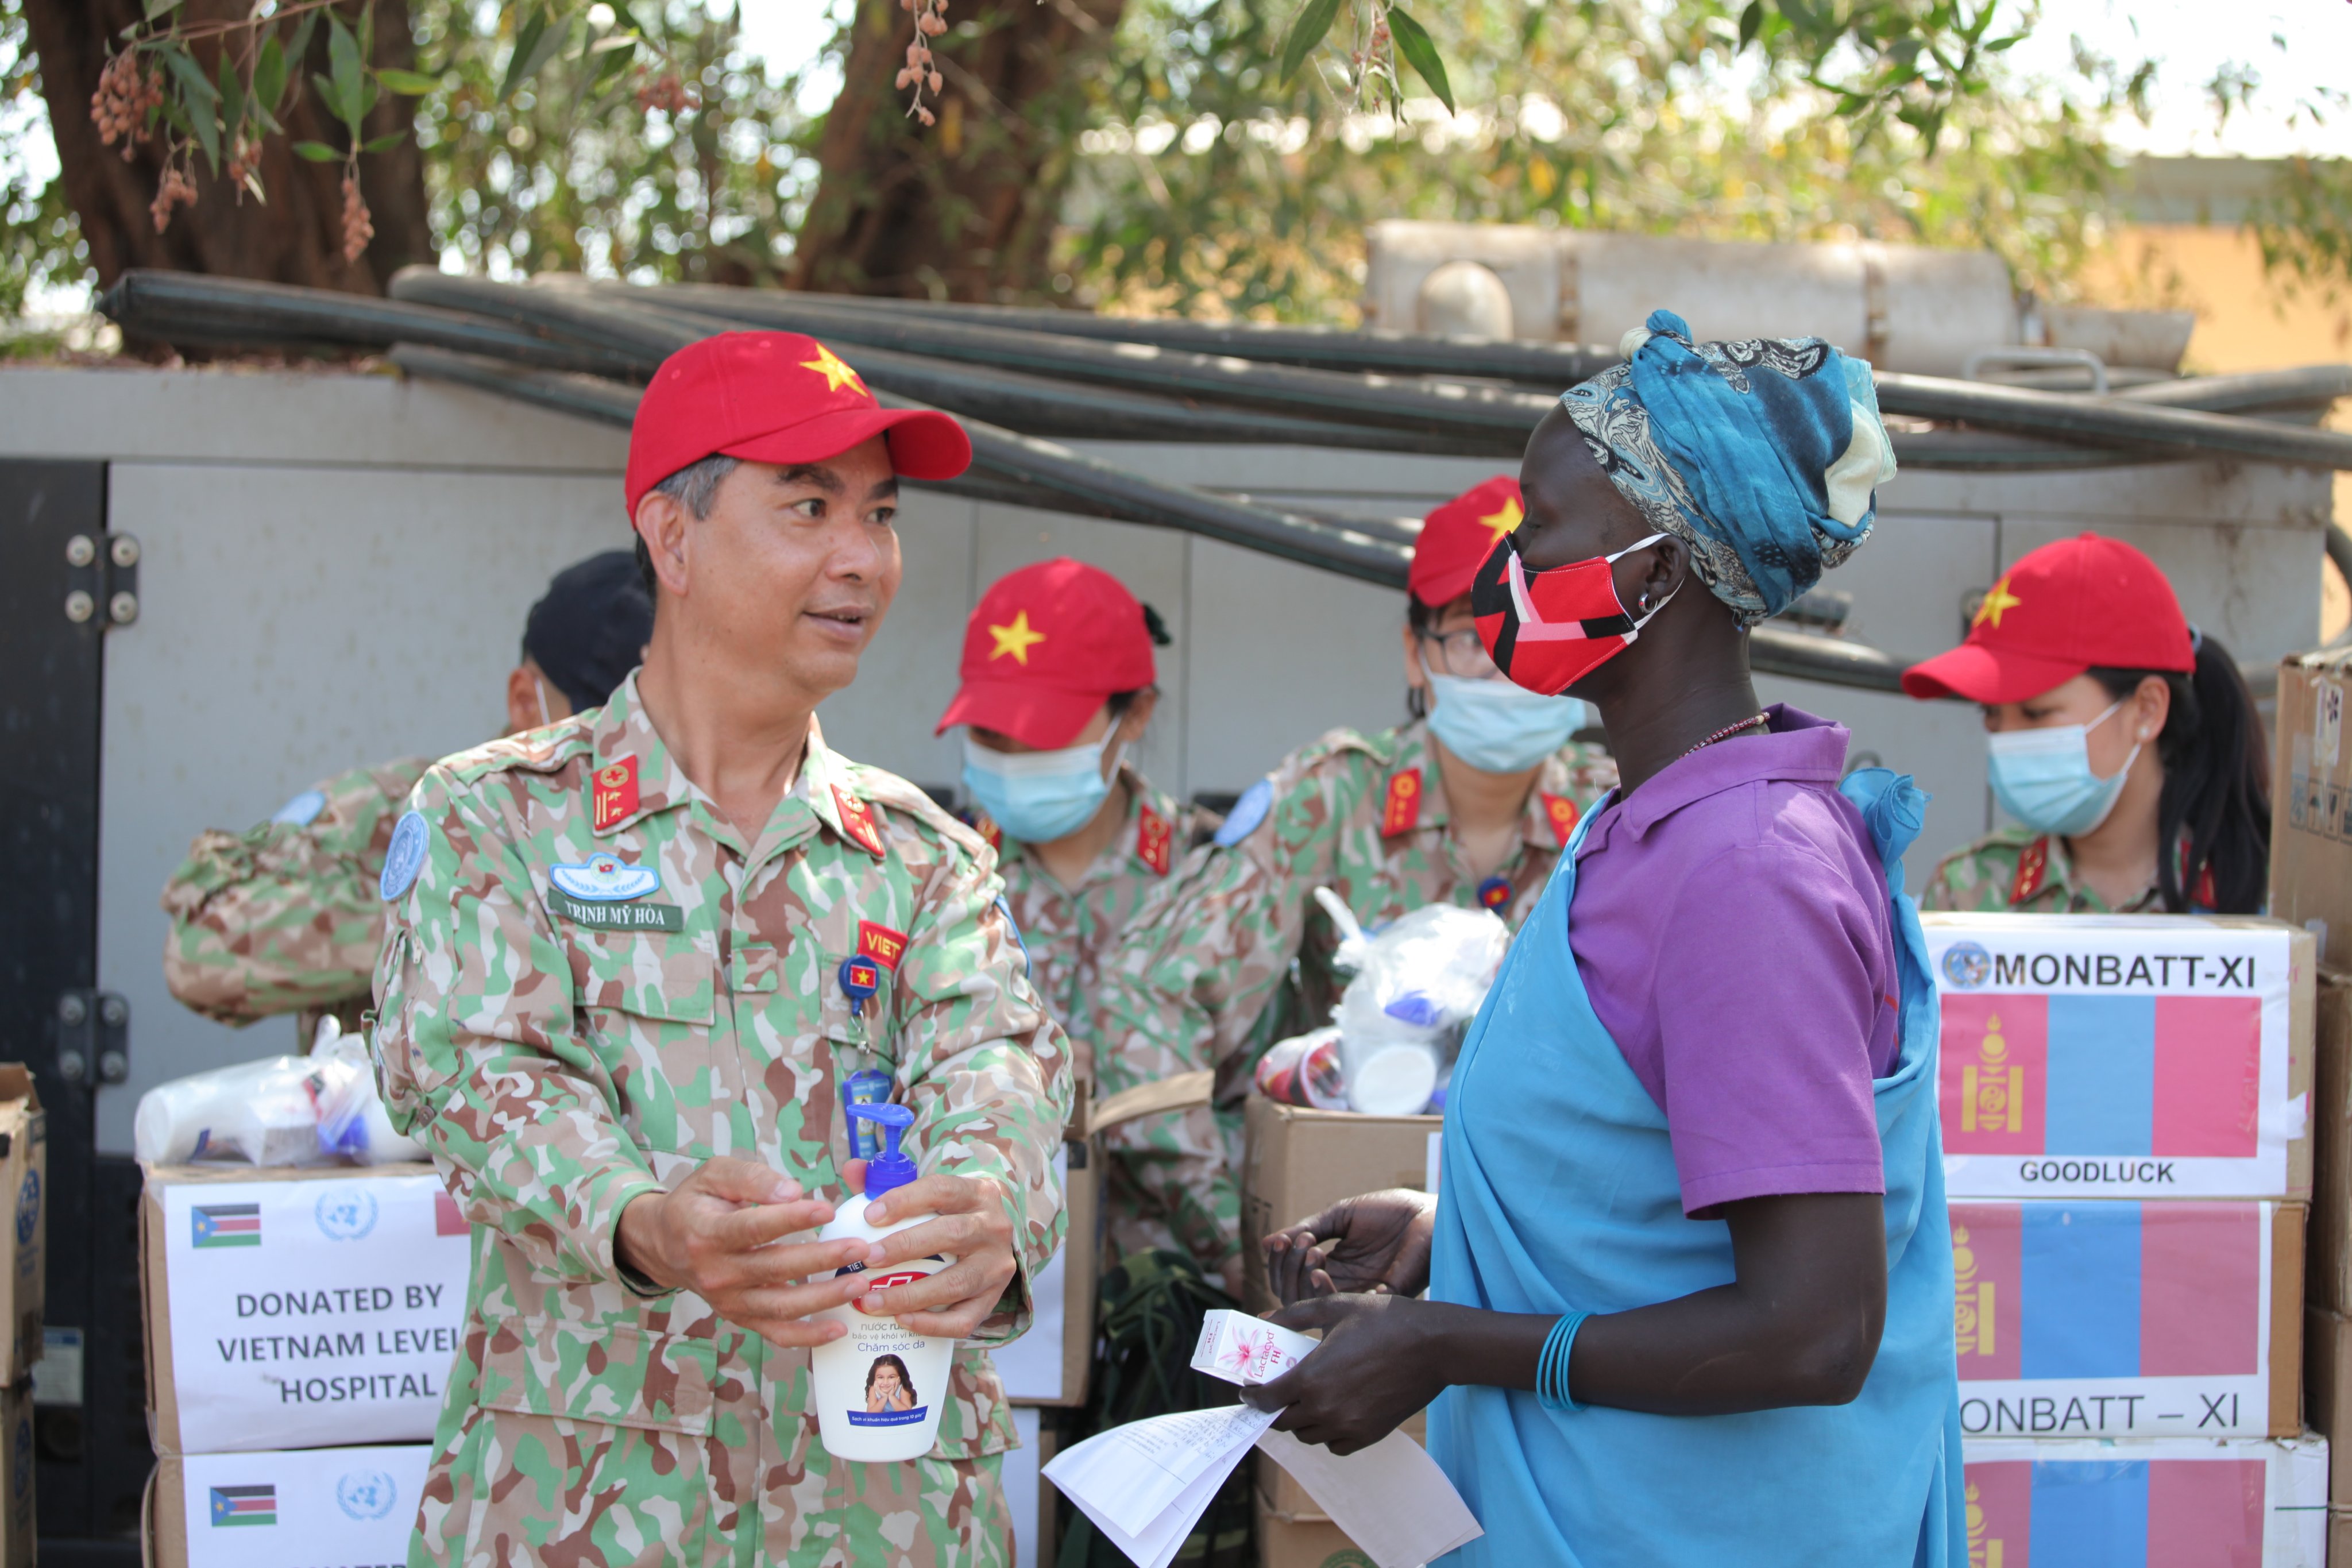 A Vietnamese doctor, who is serving the Vietnamese level-2 field hospital No. 3 under the United Nations peacekeeping mission in South Sudan, shows a South Sudanese woman how to use a hygiene product. Photo: Vietnamese level-2 field hospital No. 3